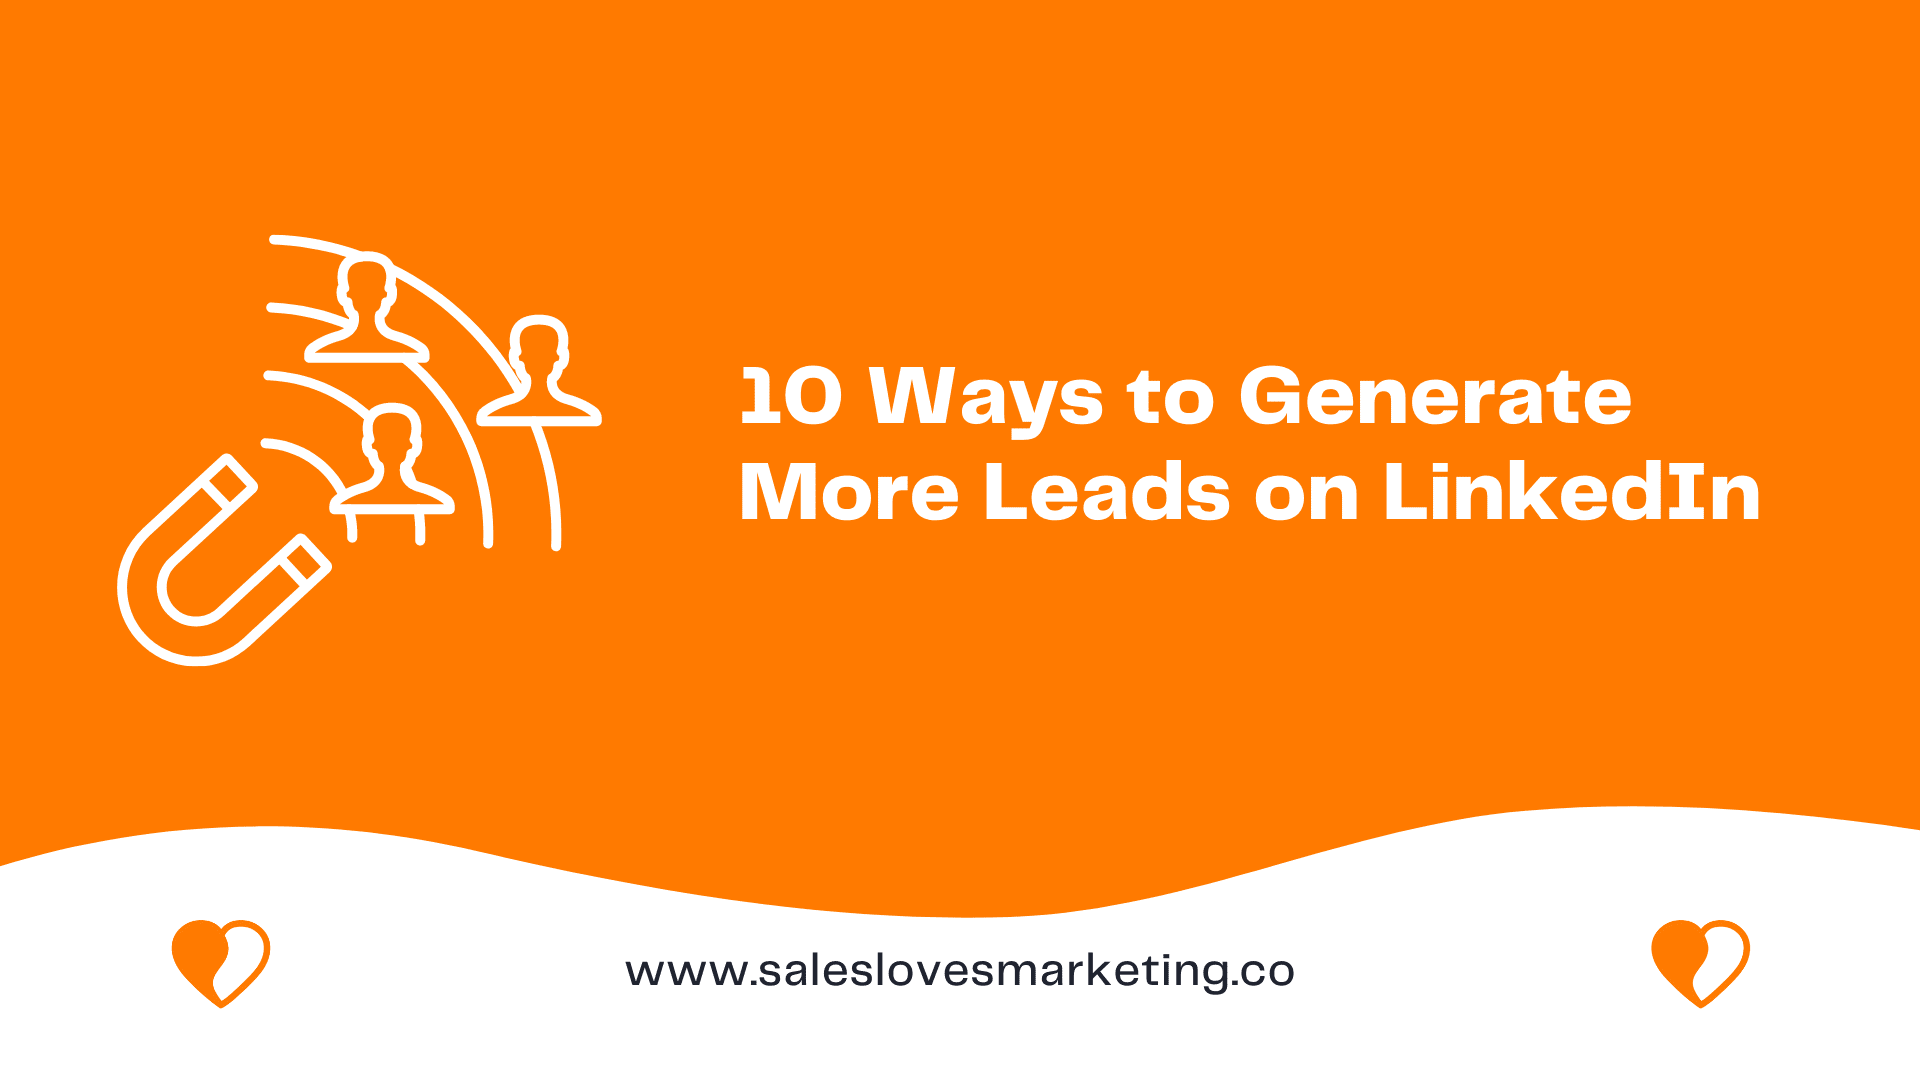 10 Ways to Generate More Leads on LinkedIn